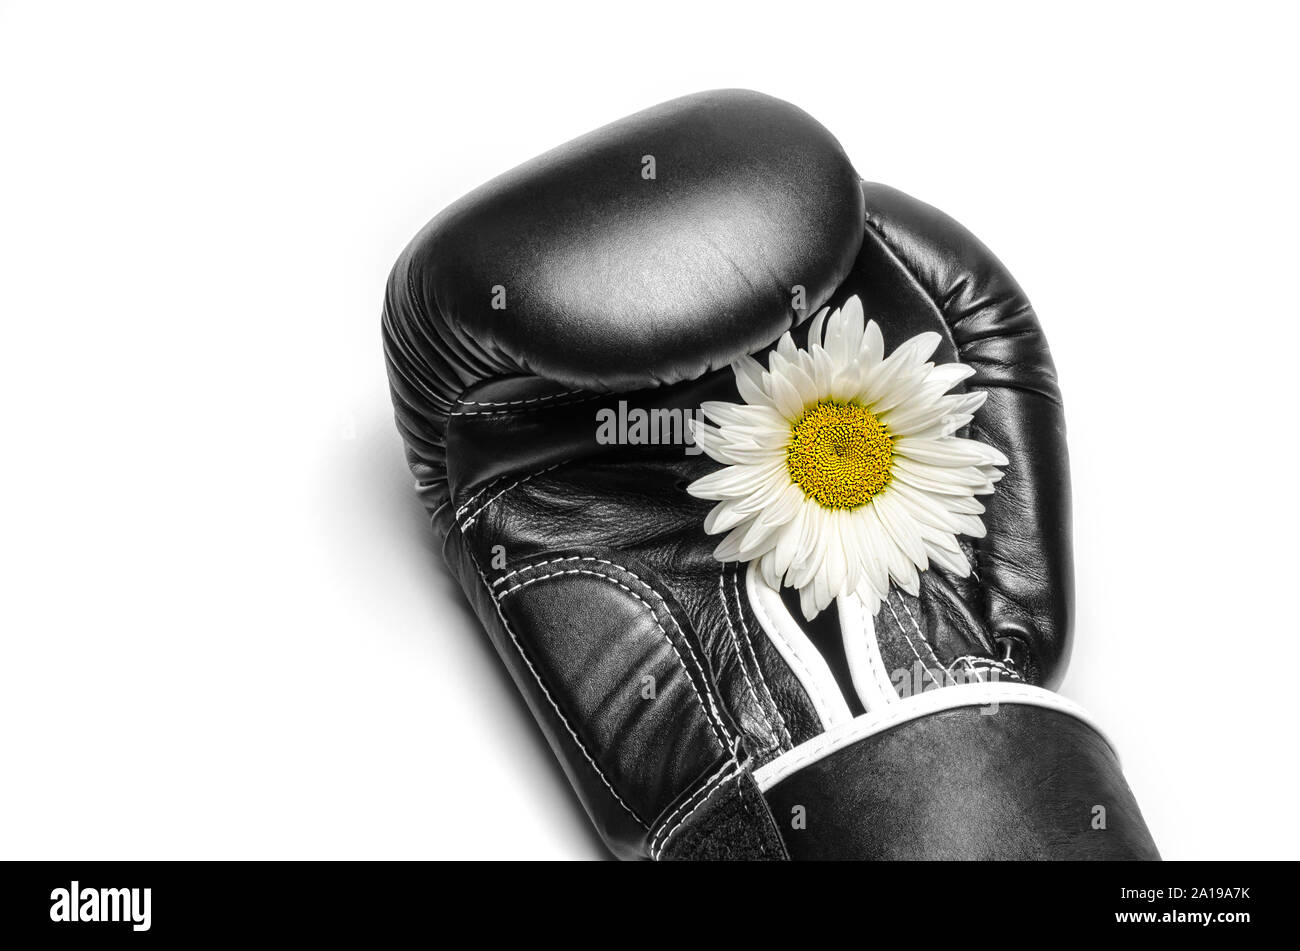 boxing glove with a large chamomile flower closeup Stock Photo